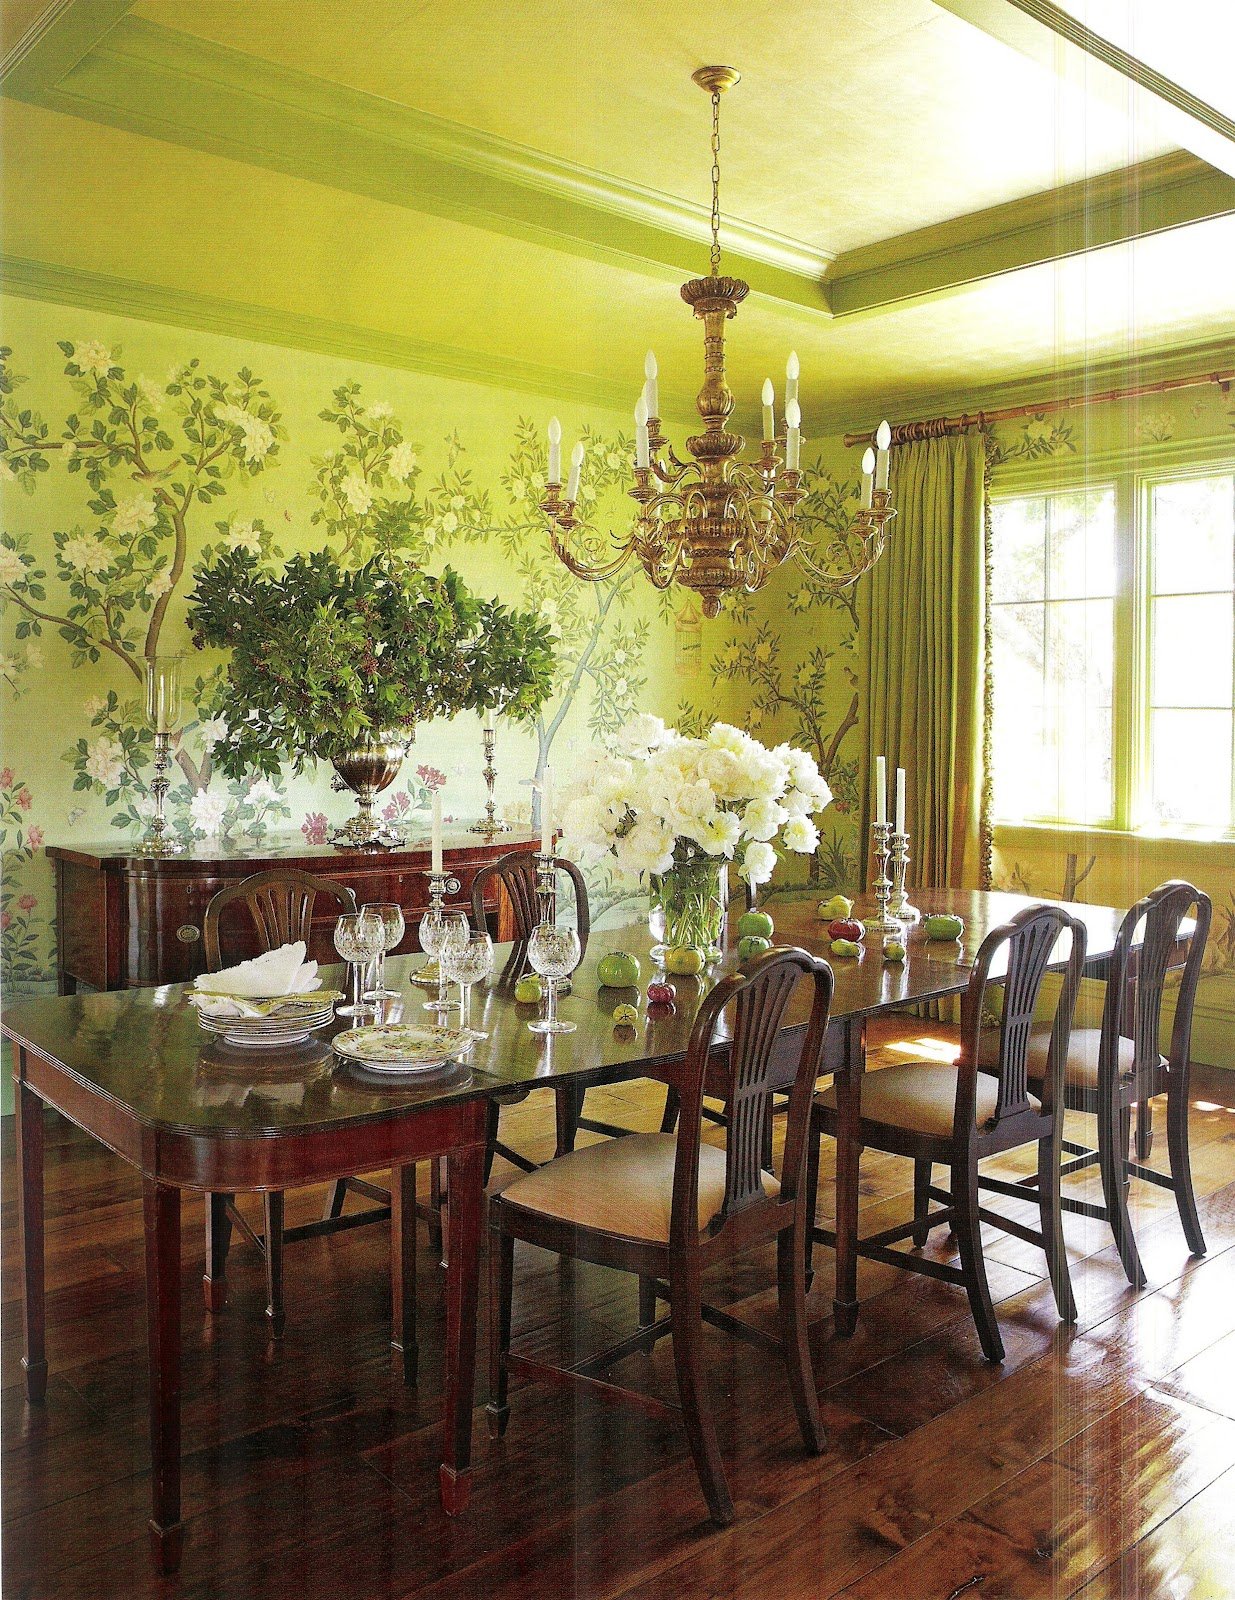 Gracie chinoiserie wallpaper wraps the dining room